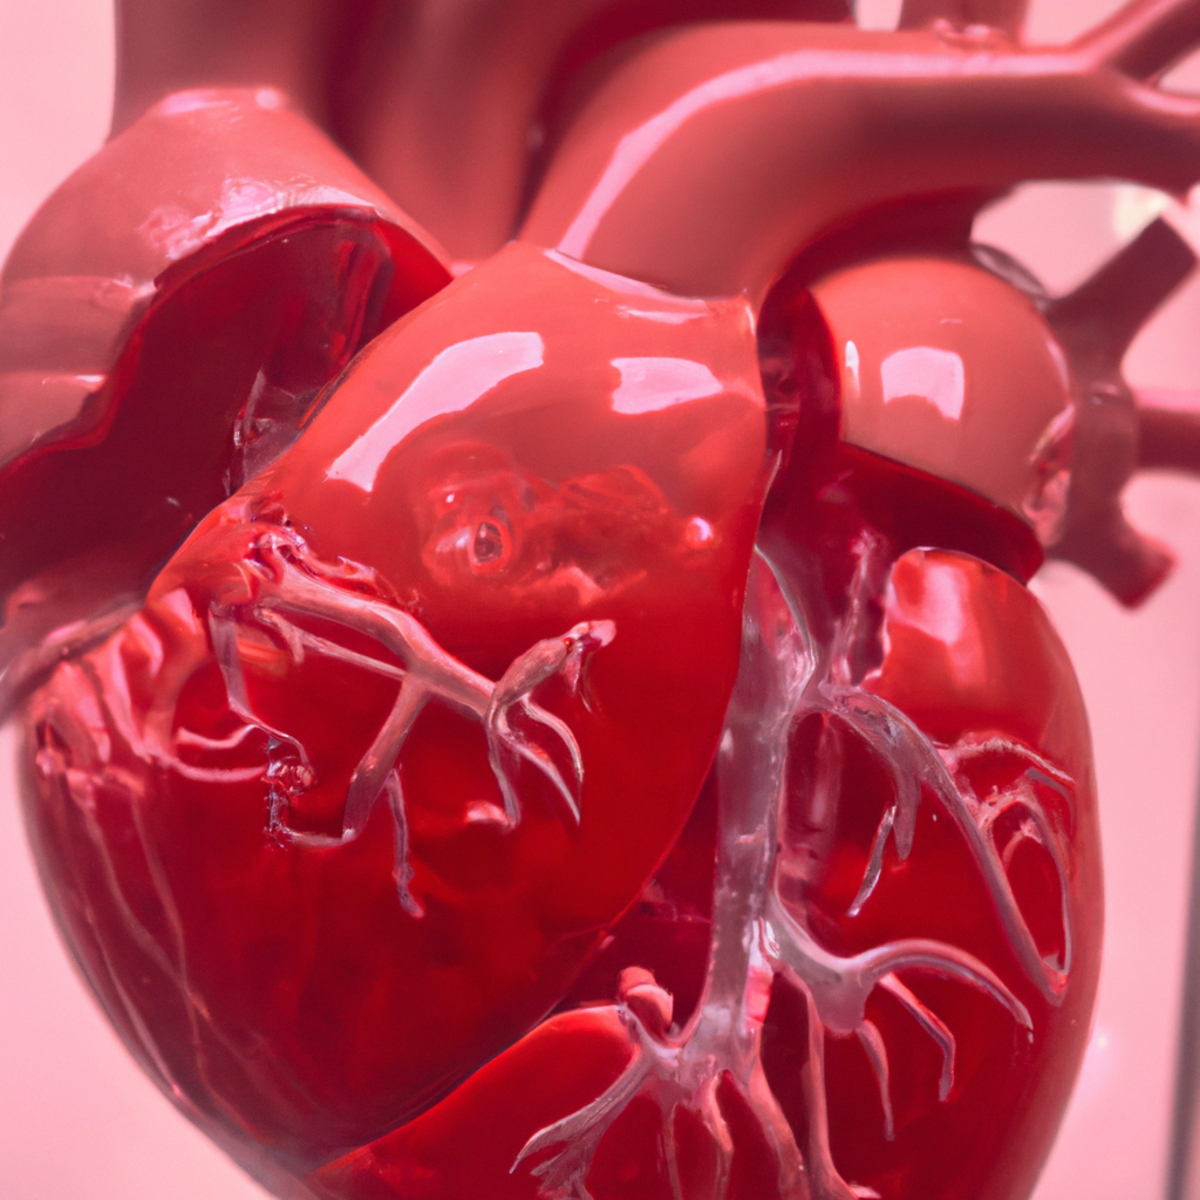 Close-up of intricate, transparent heart model with vibrant red color, showcasing abnormal enlargement and irregular shape of ventricles - Hypertrophic Cardiomyopathy (HCM)